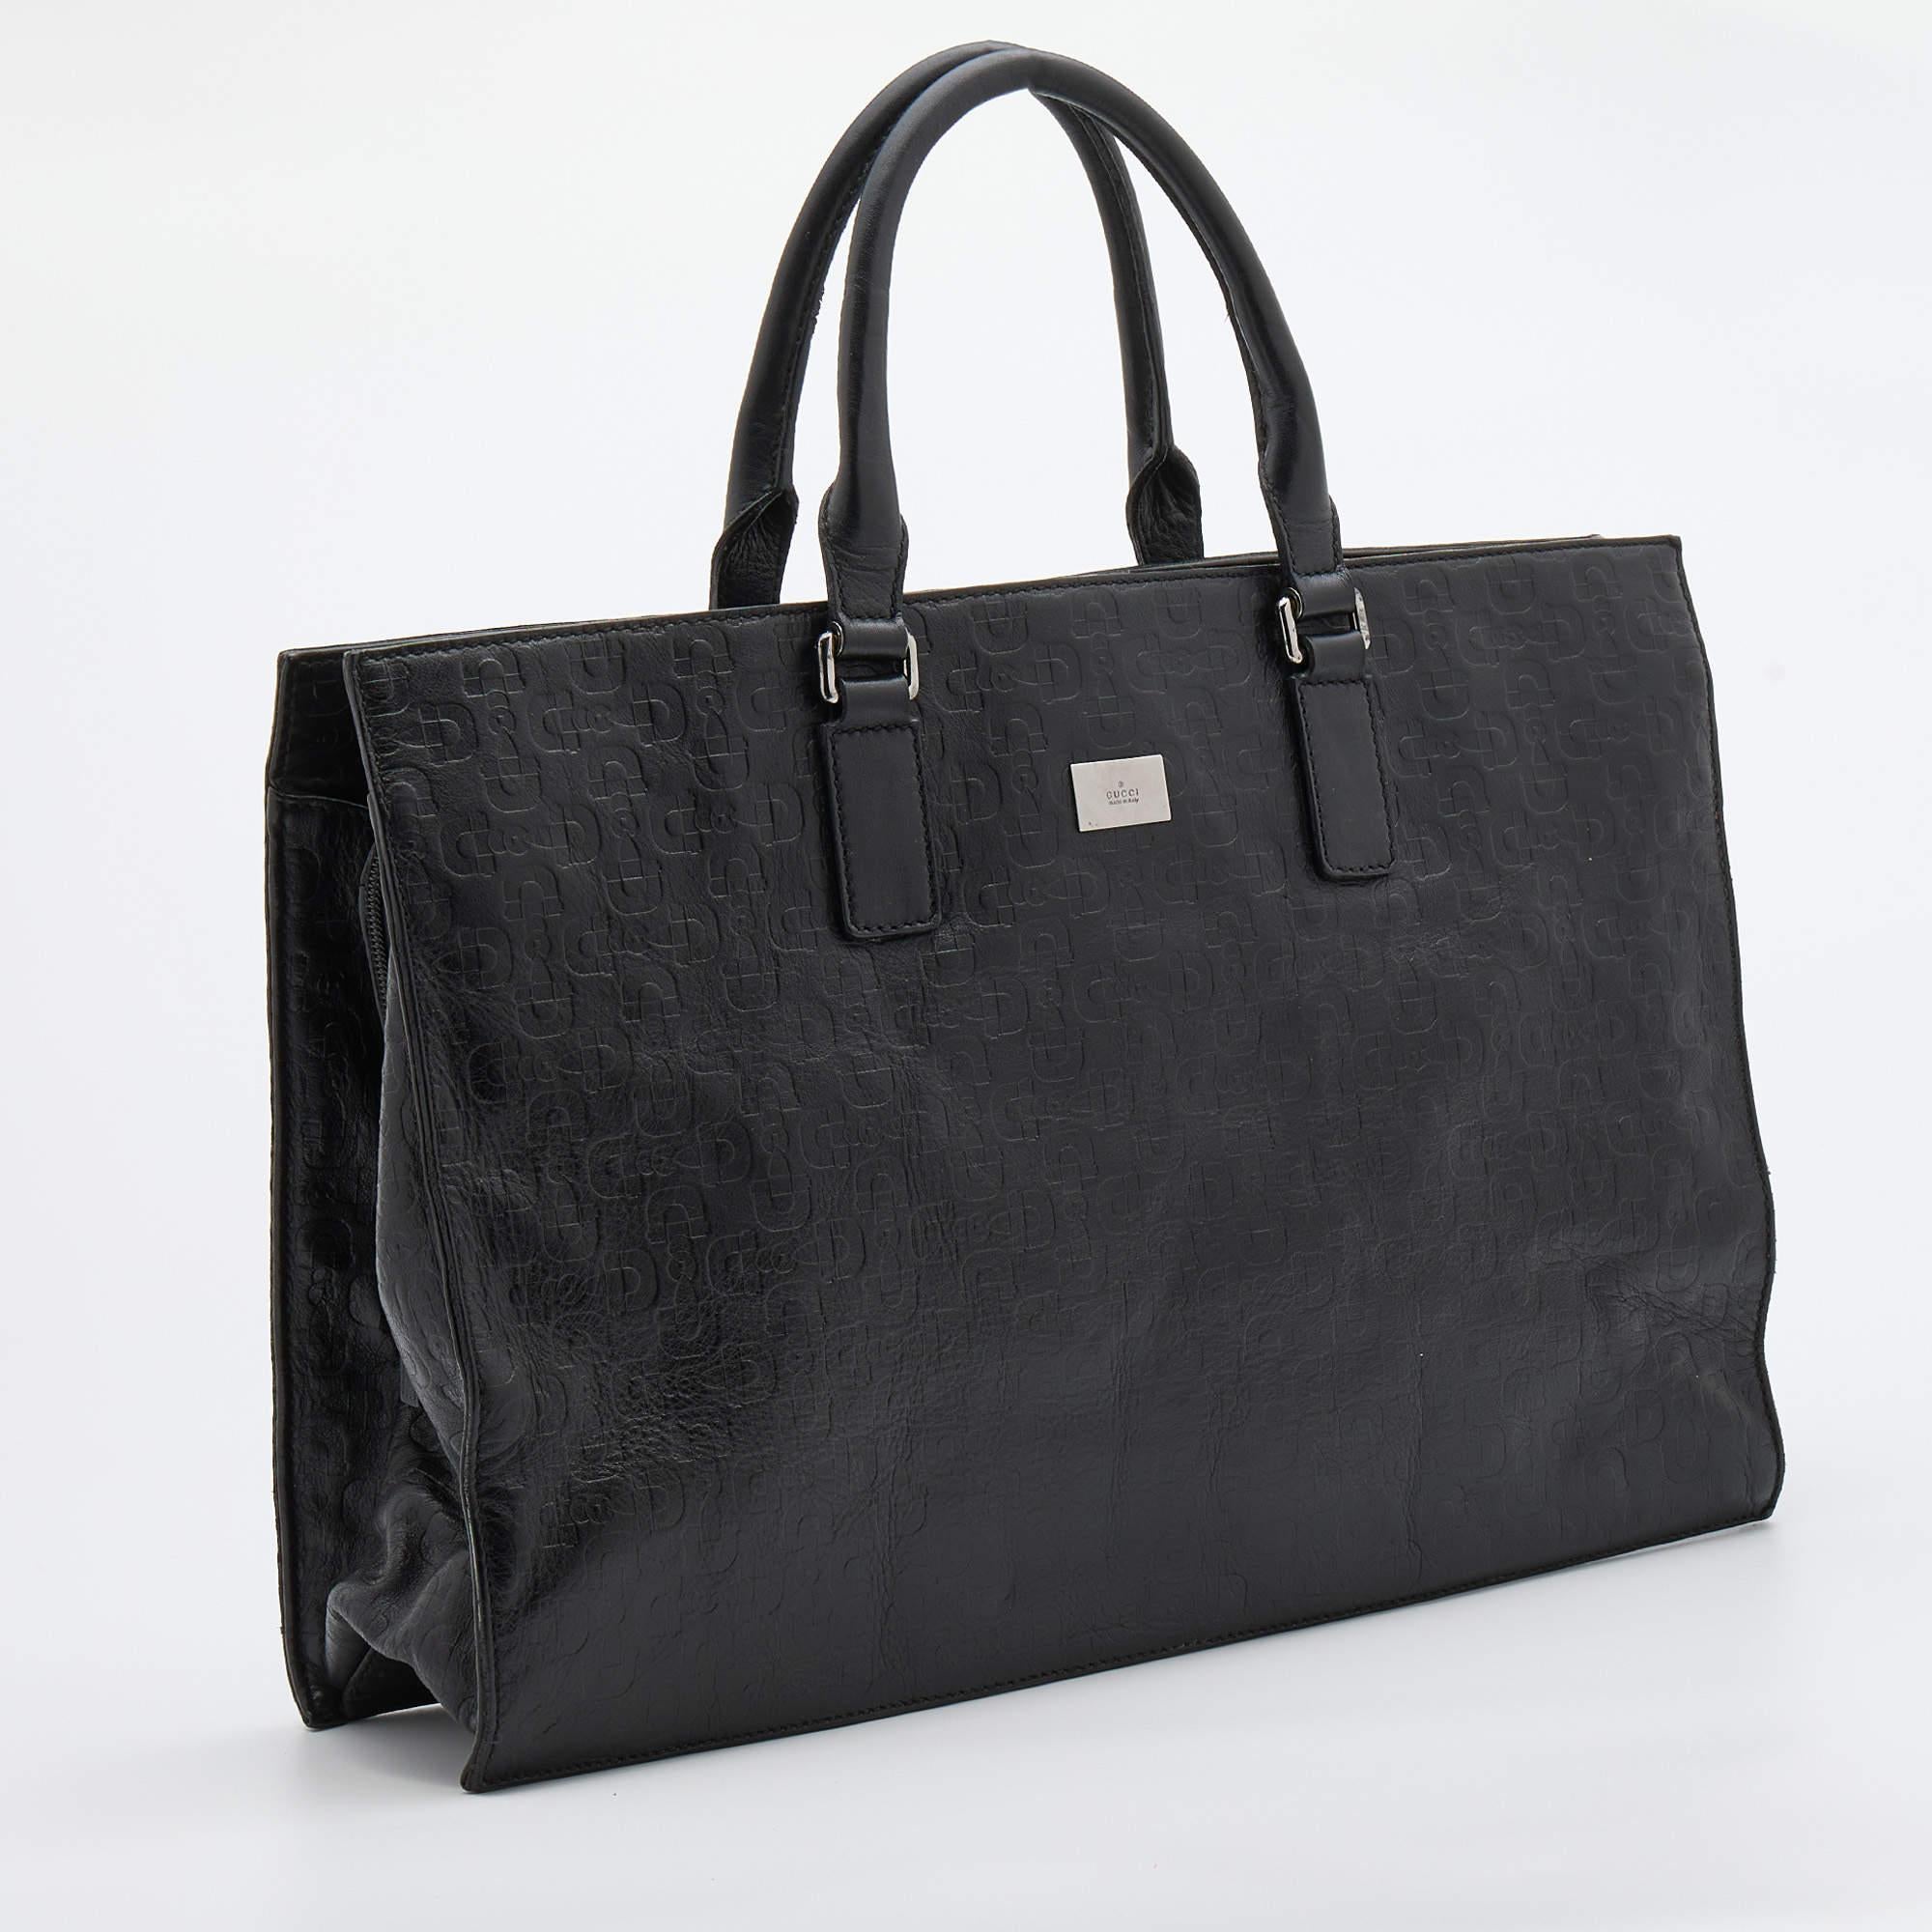 Women's Gucci Black Horsebit Embossed Leather Large Tote